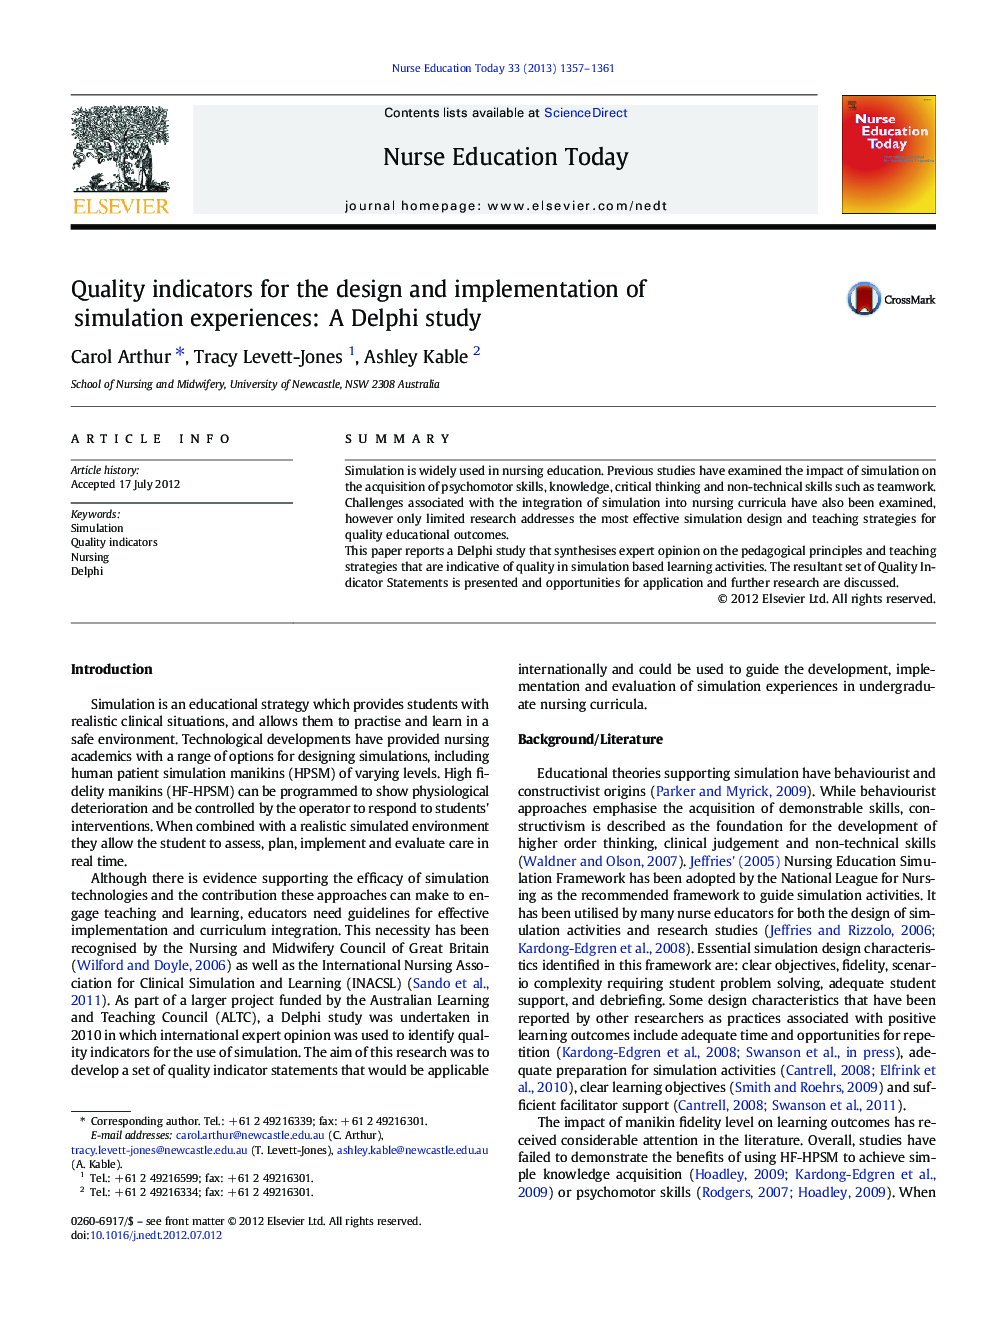 Quality indicators for the design and implementation of simulation experiences: A Delphi study